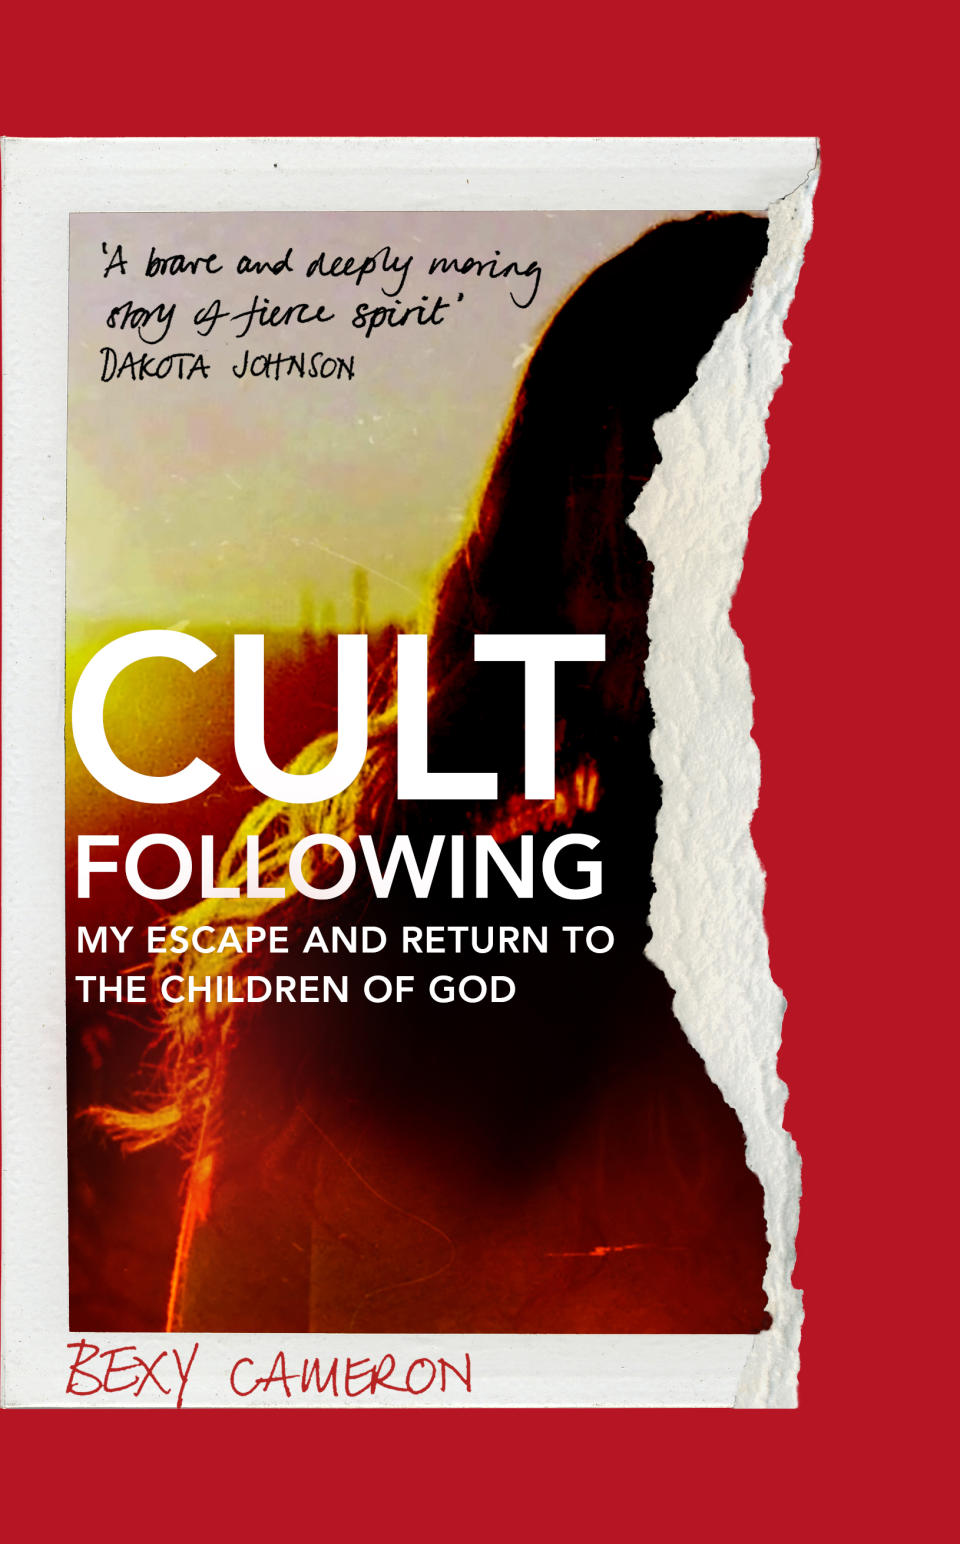 Front cover image of Bexy Cameron's book, 'Cult Following: My Escape And Return to The Children of God'.